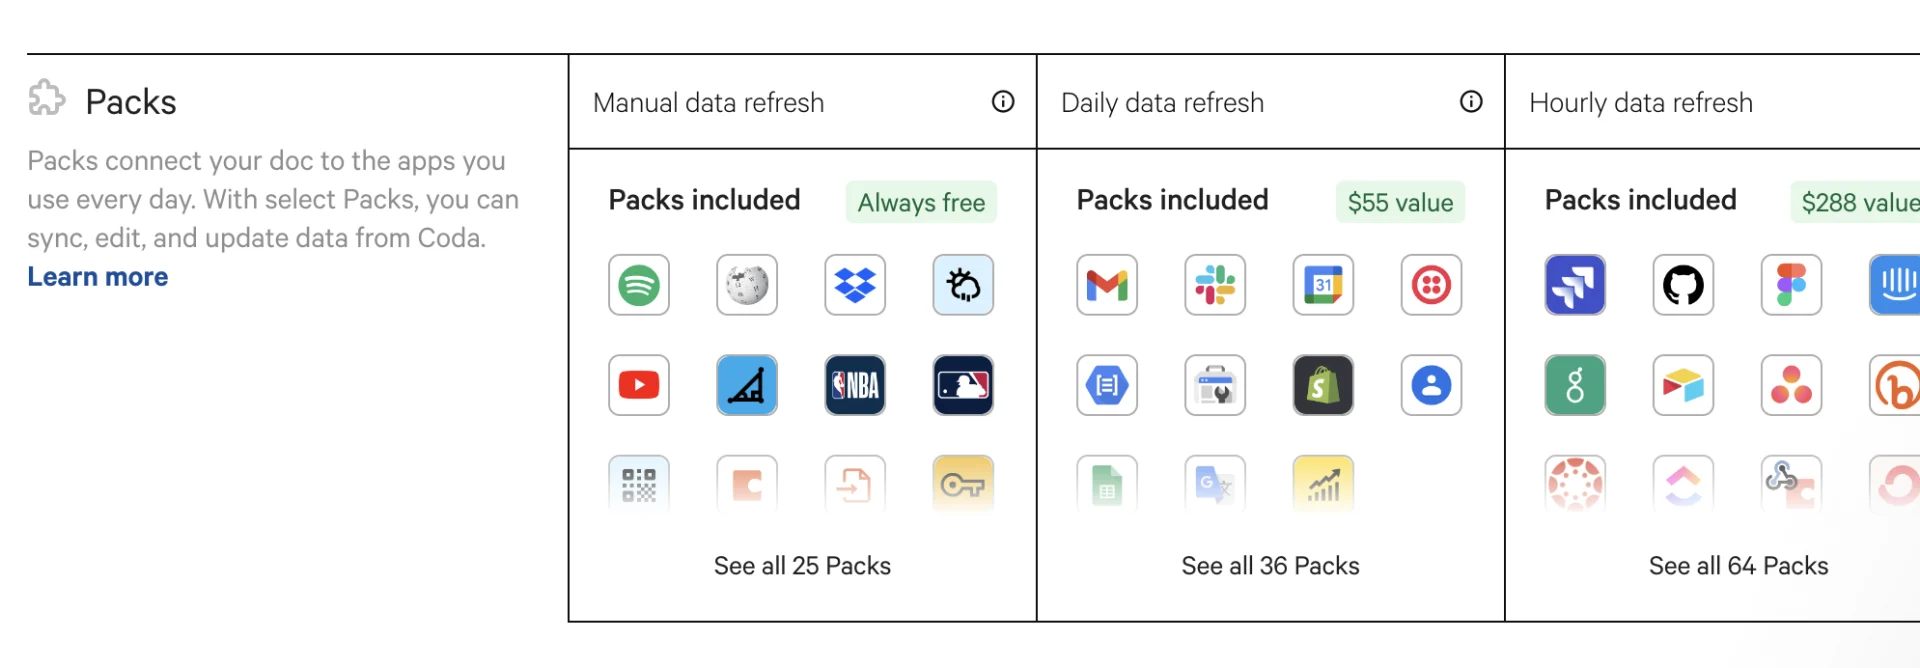 Pack Pricing for Coda.io